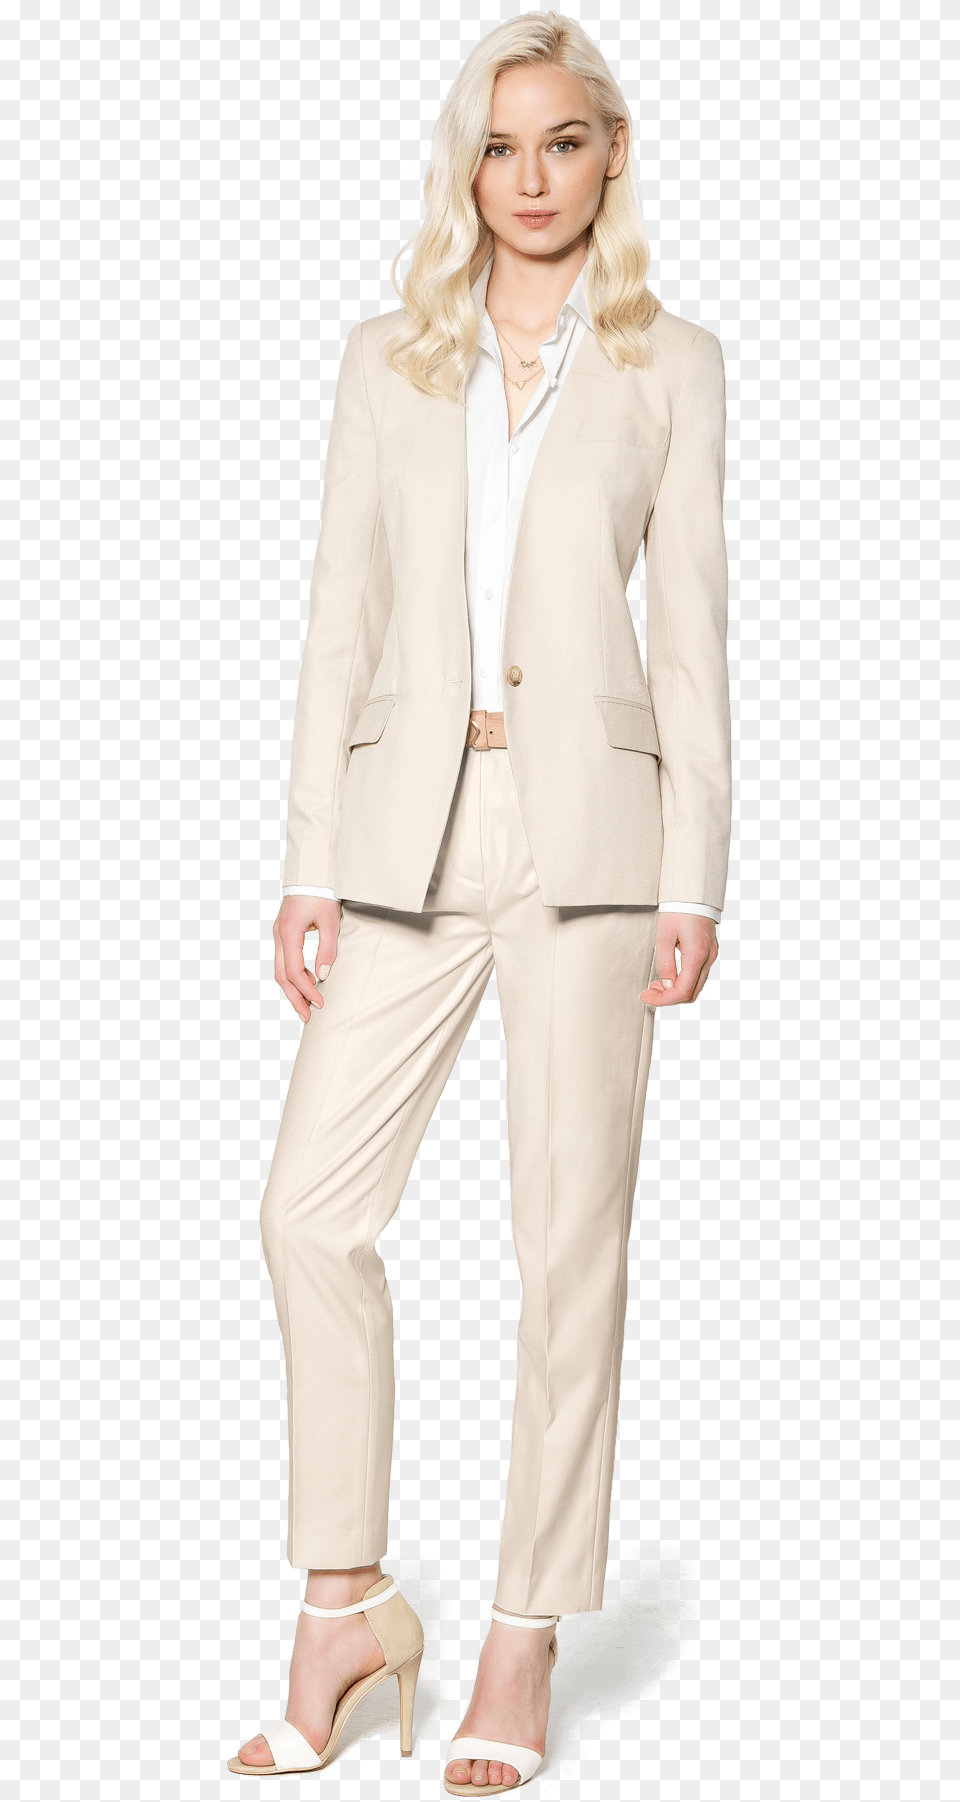 Beige Pant Suit For Women White Female Suit, Clothing, Formal Wear, Sandal, Person Png